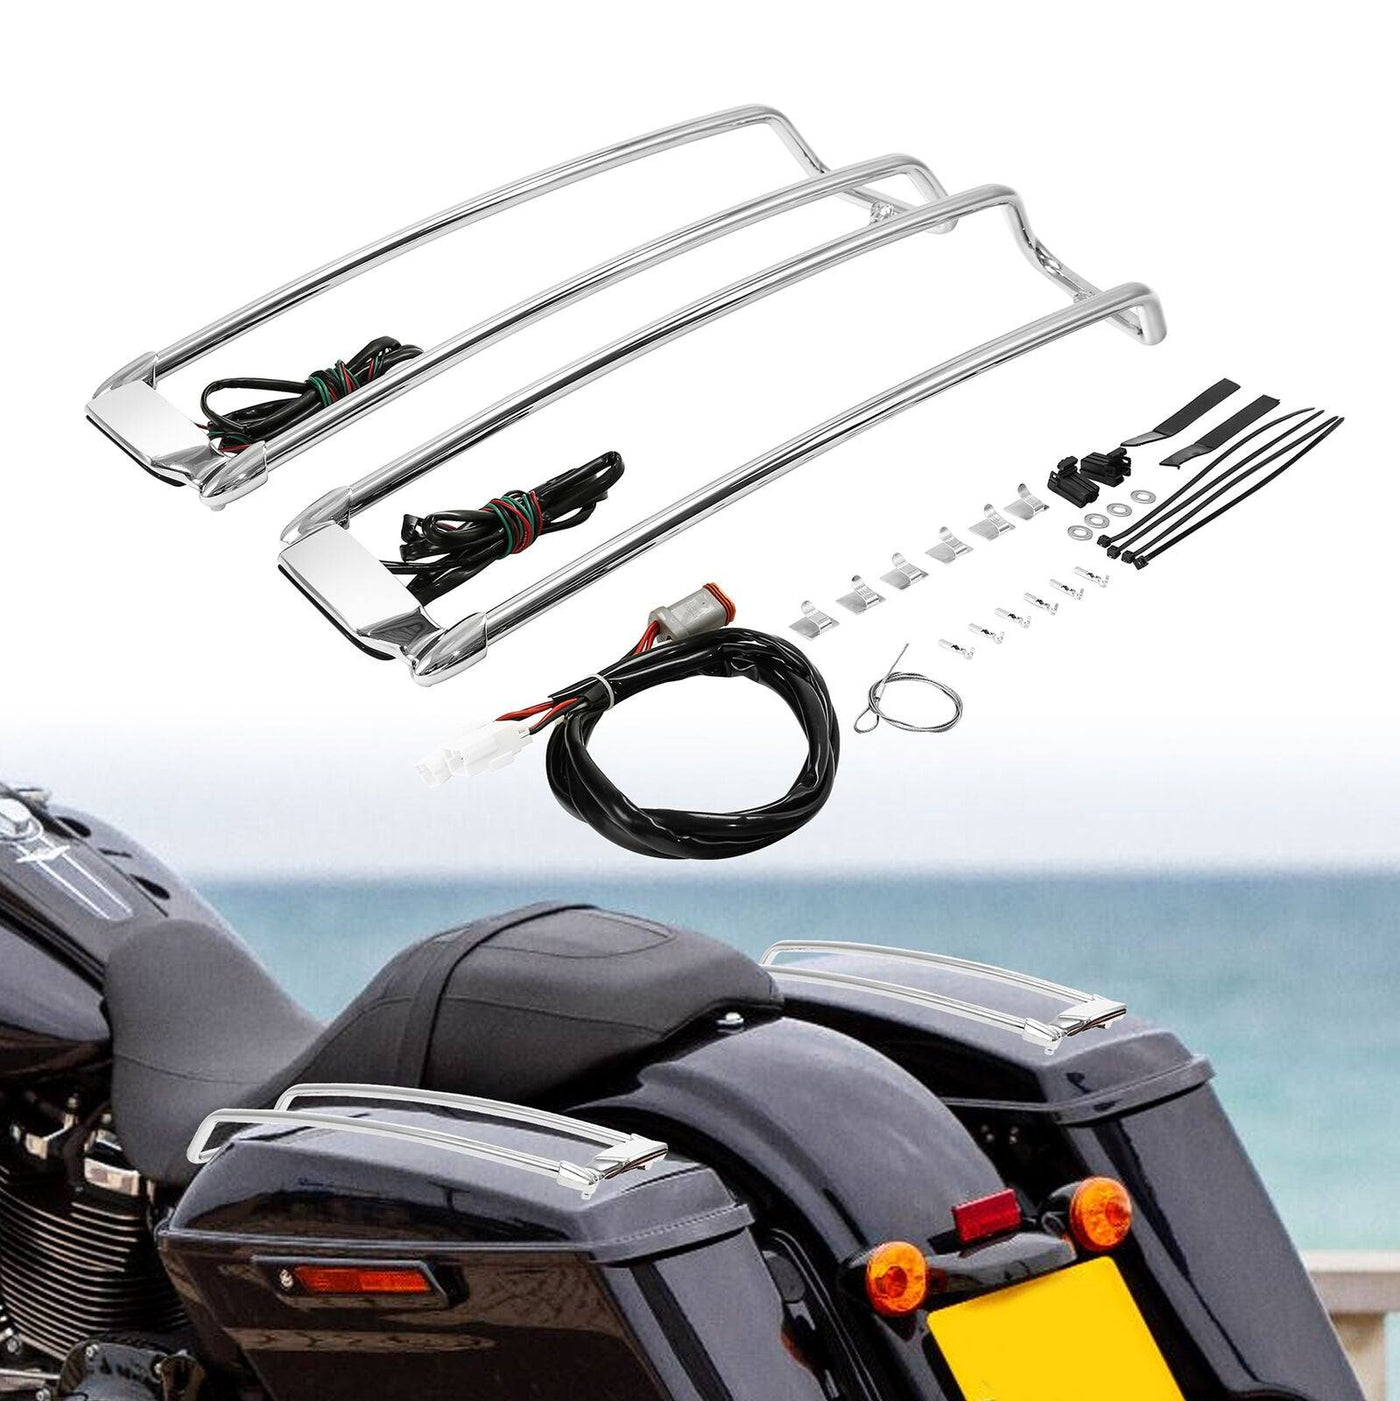 Saddlebag Lid Top Rail &LED Light Fit For Harley Touring Street Road Glide 94-13 - Moto Life Products